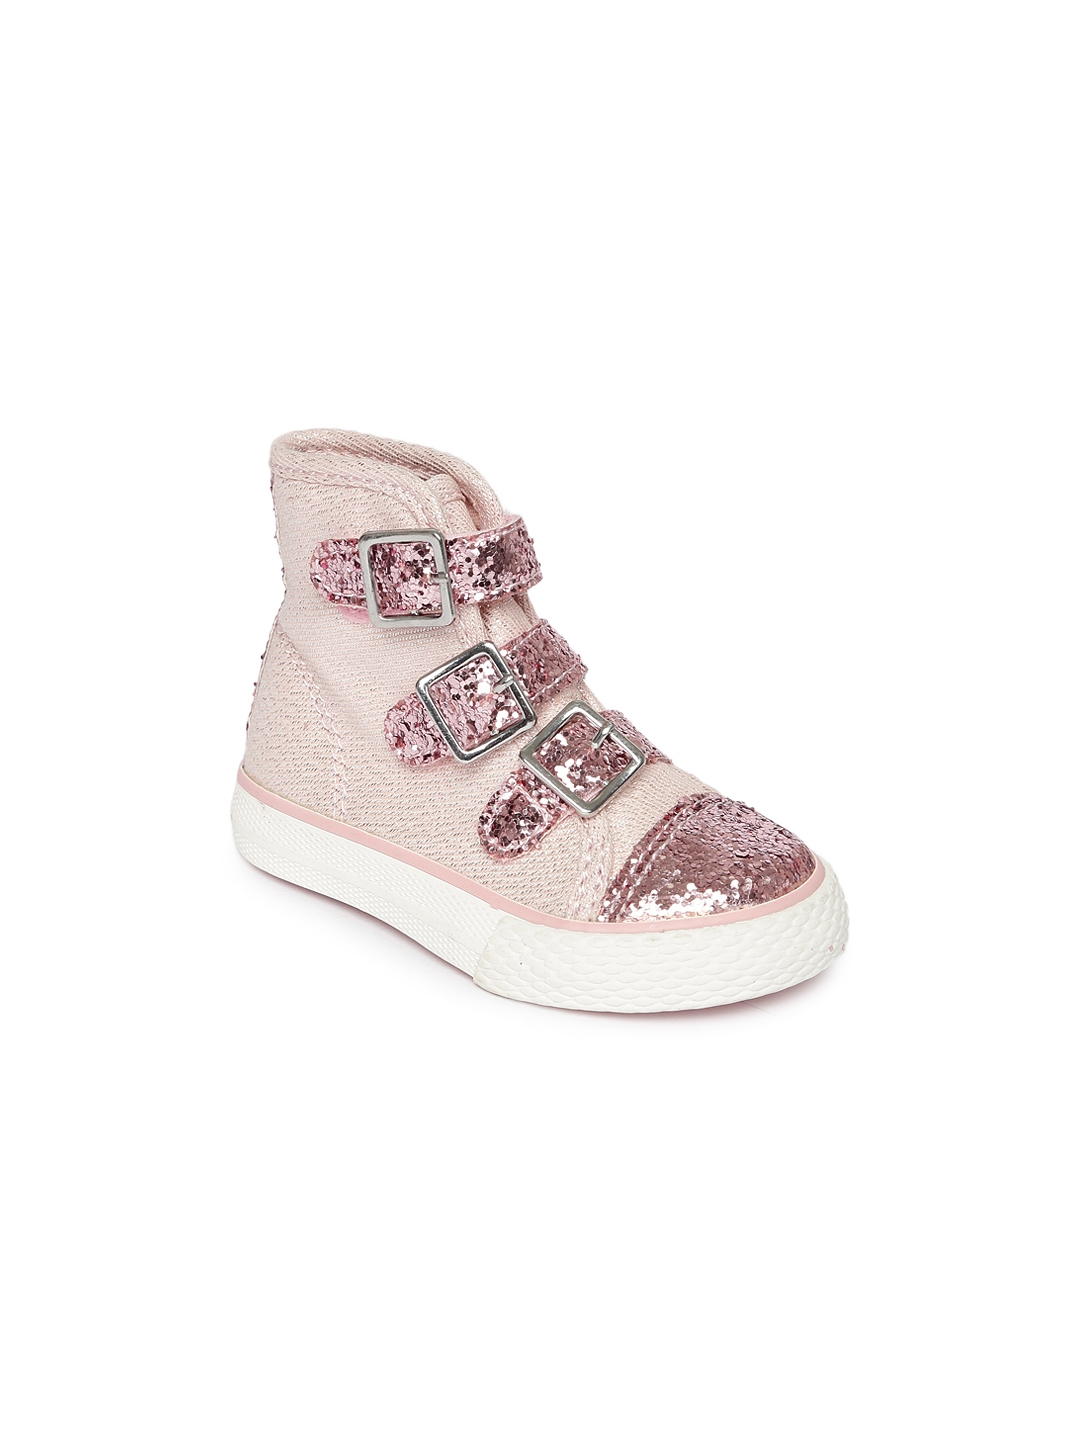 Buy The Childrens Place Girls Pink Shimmery Sneakers - Casual Shoes for ...